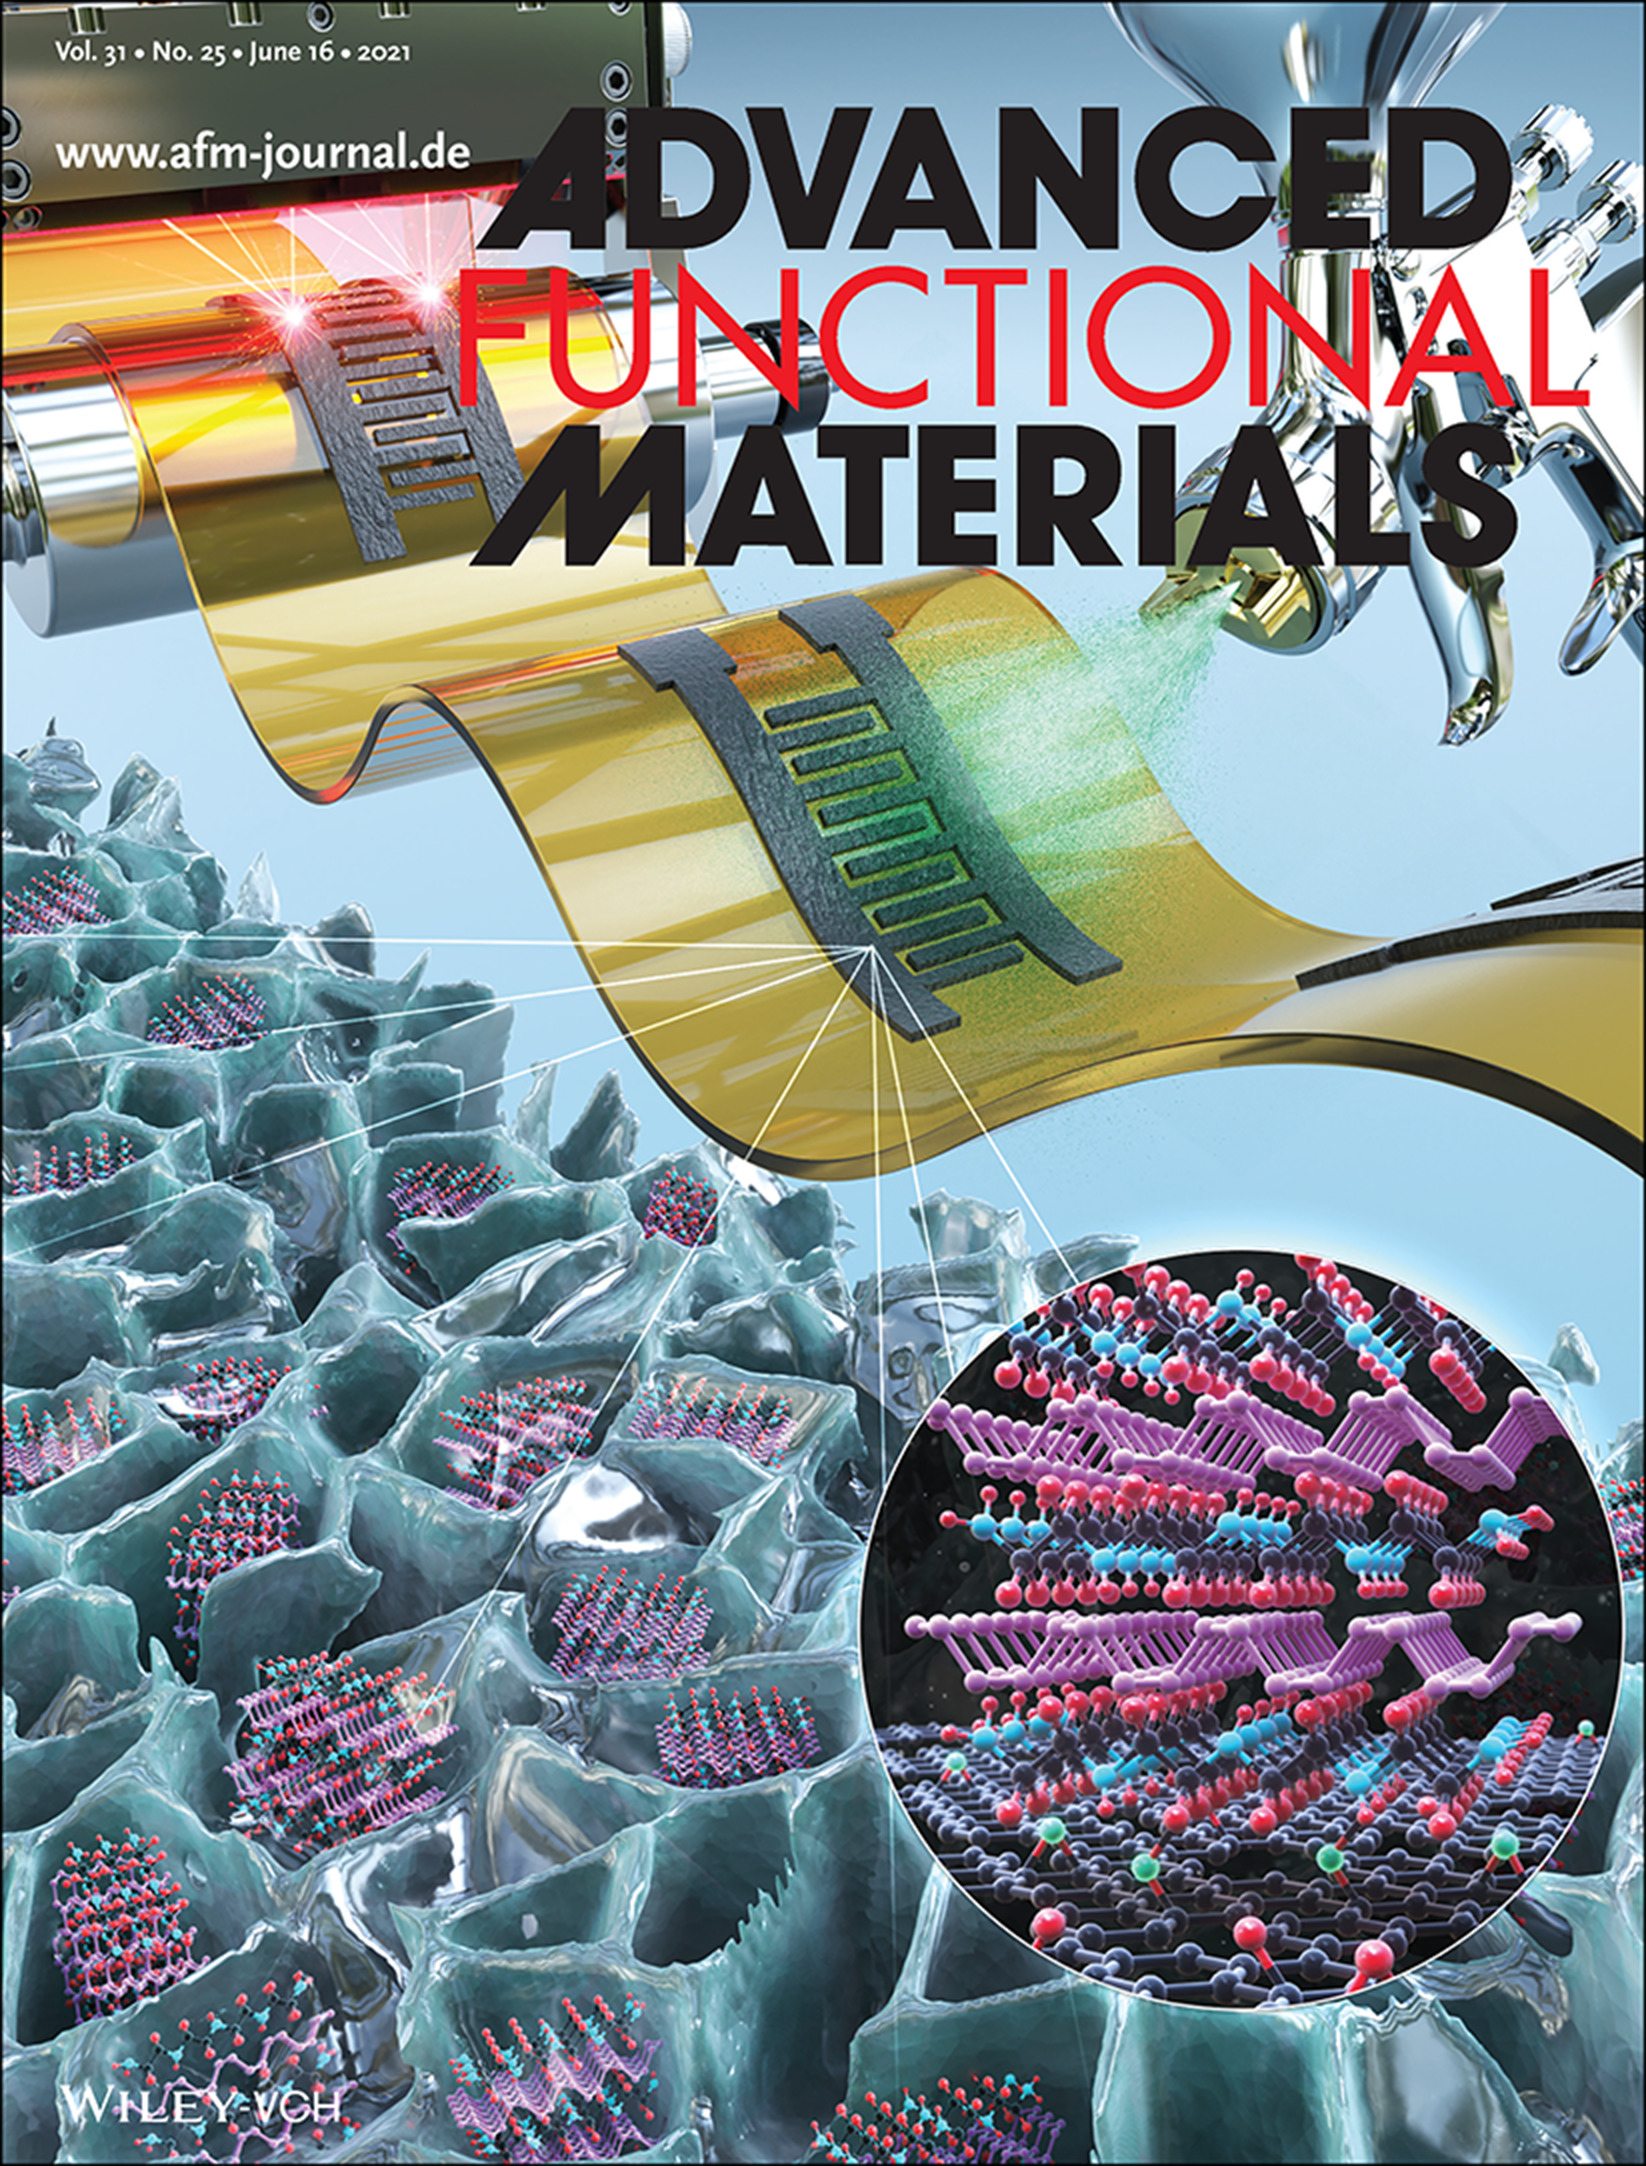 Cover Image Published on Advanced Functional Material